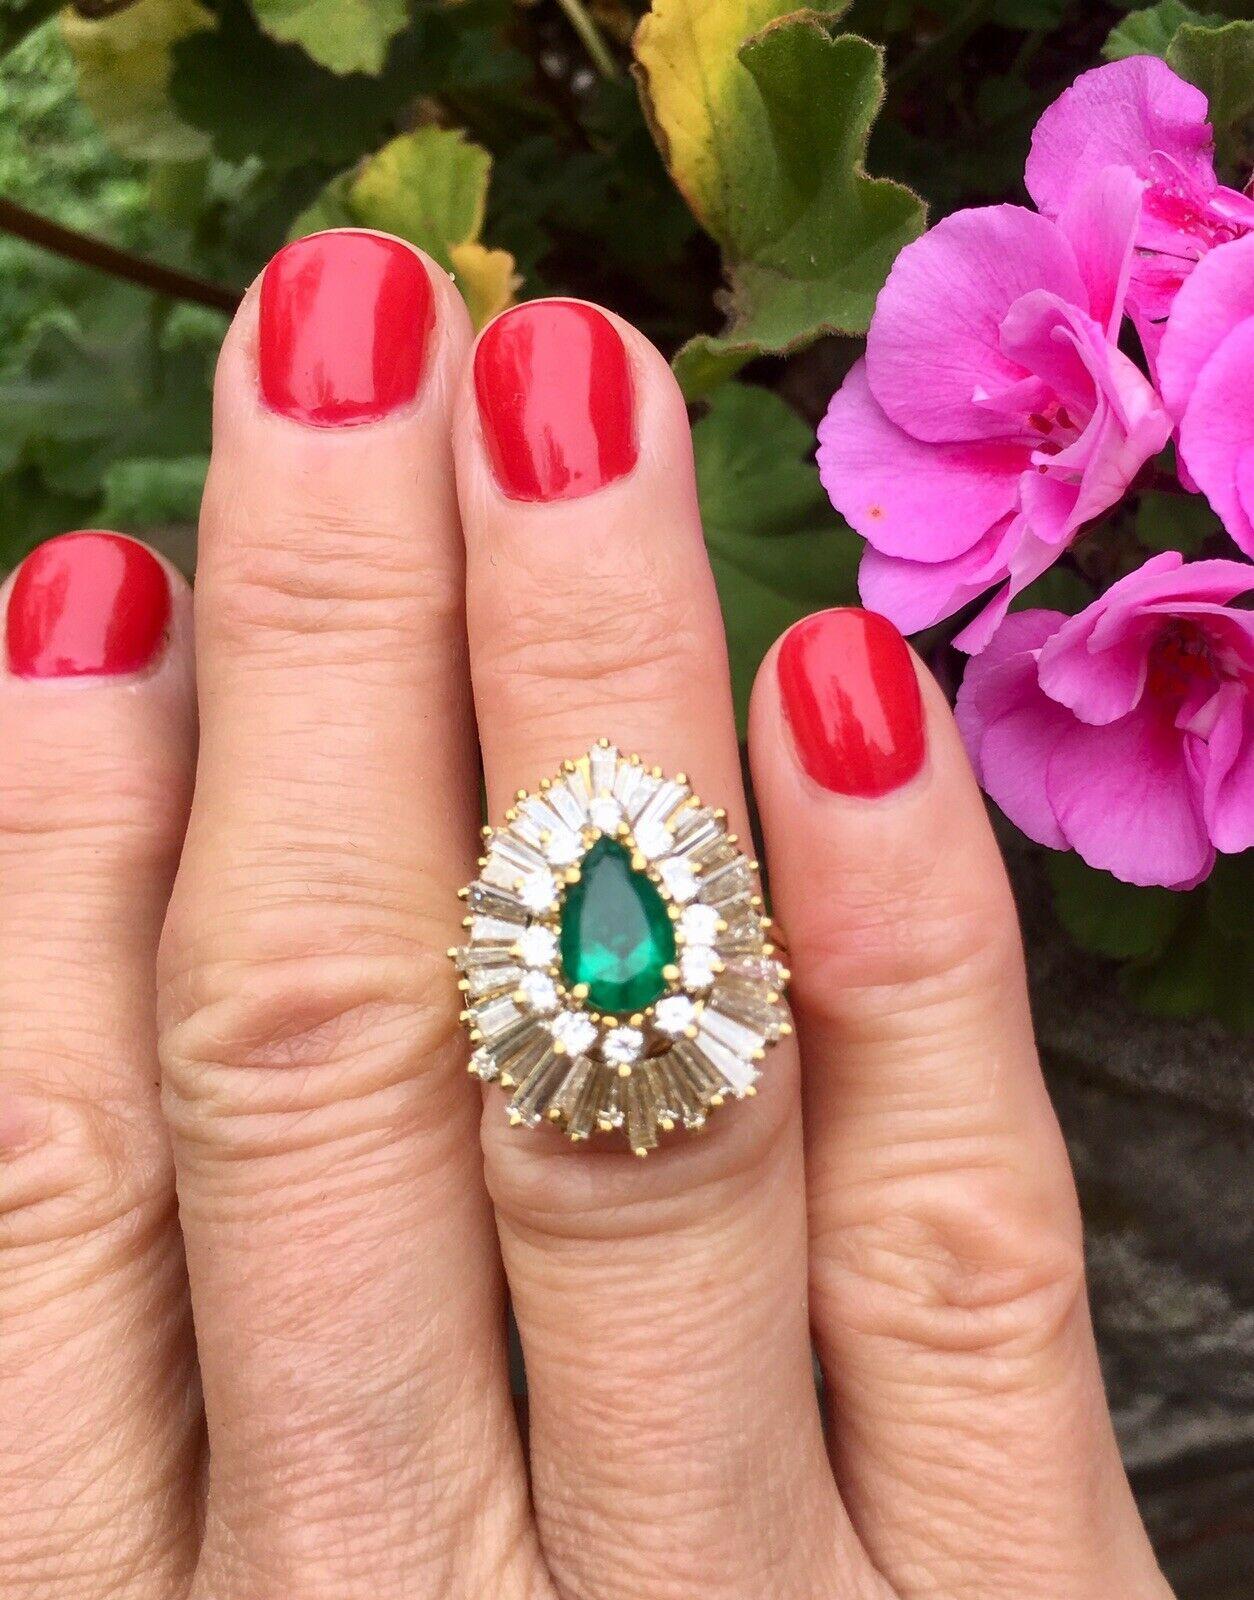 Stunning 18K Yellow Gold 3.44ct Emerald Baguette Diamond Ballerina Cocktail Ring

This gorgeous cocktail ring set in 18k yellow gold features 0.46 carats of round brilliant diamonds, 1.90 carats of tapered baguette diamonds and a 1.08 carat lively